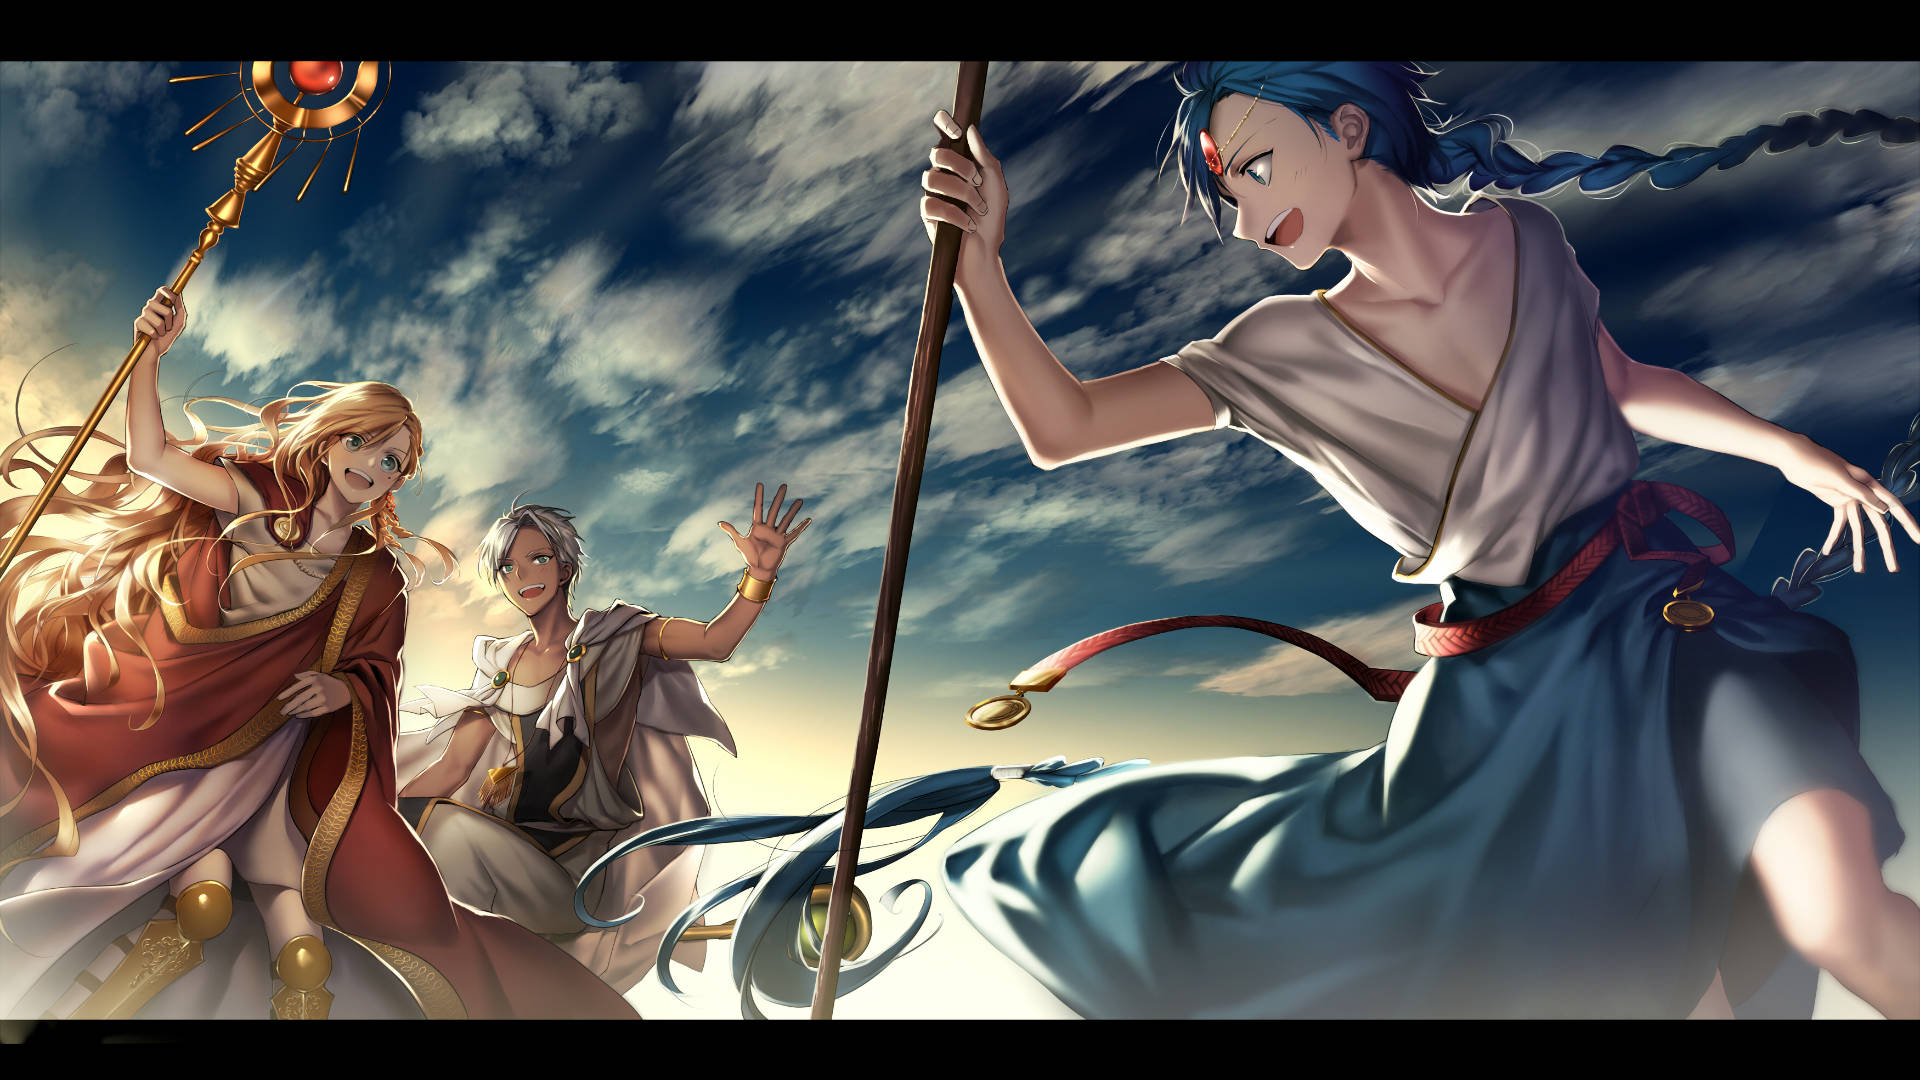 Download Magi The Labyrinth Of Magic Wizards Wallpaper